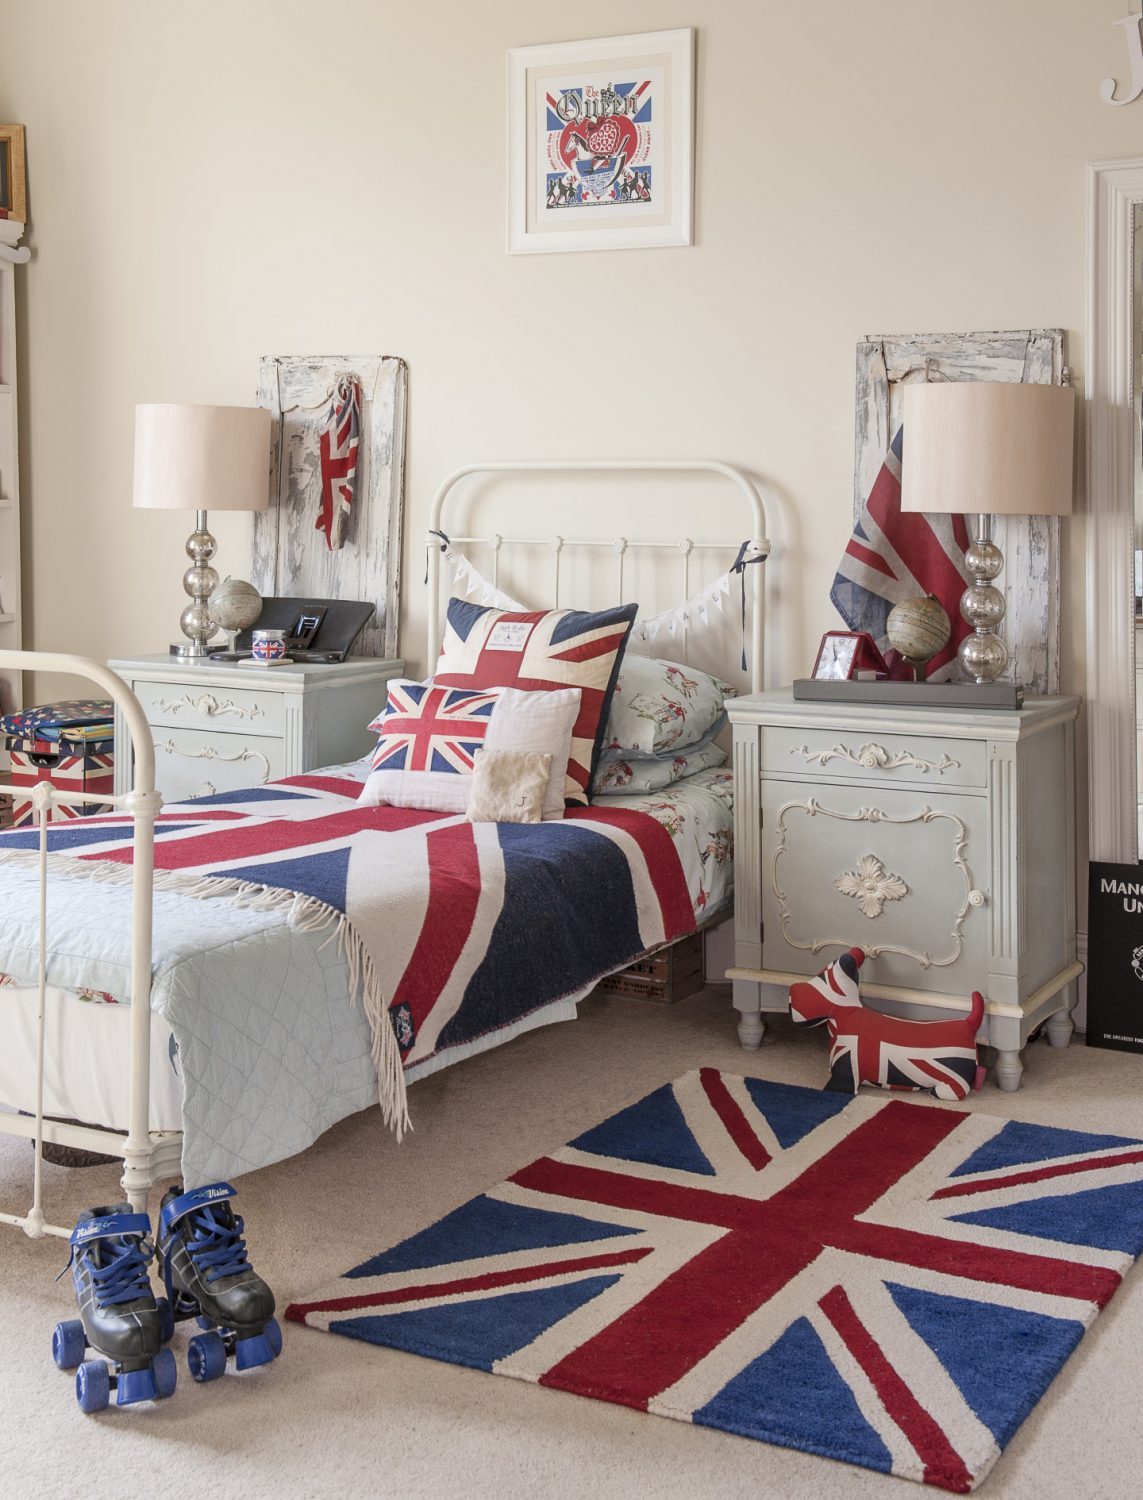 Son James’s immaculate room features a French distressed dressing table, French antique bedside tables and a Union Jack bedspread and rug